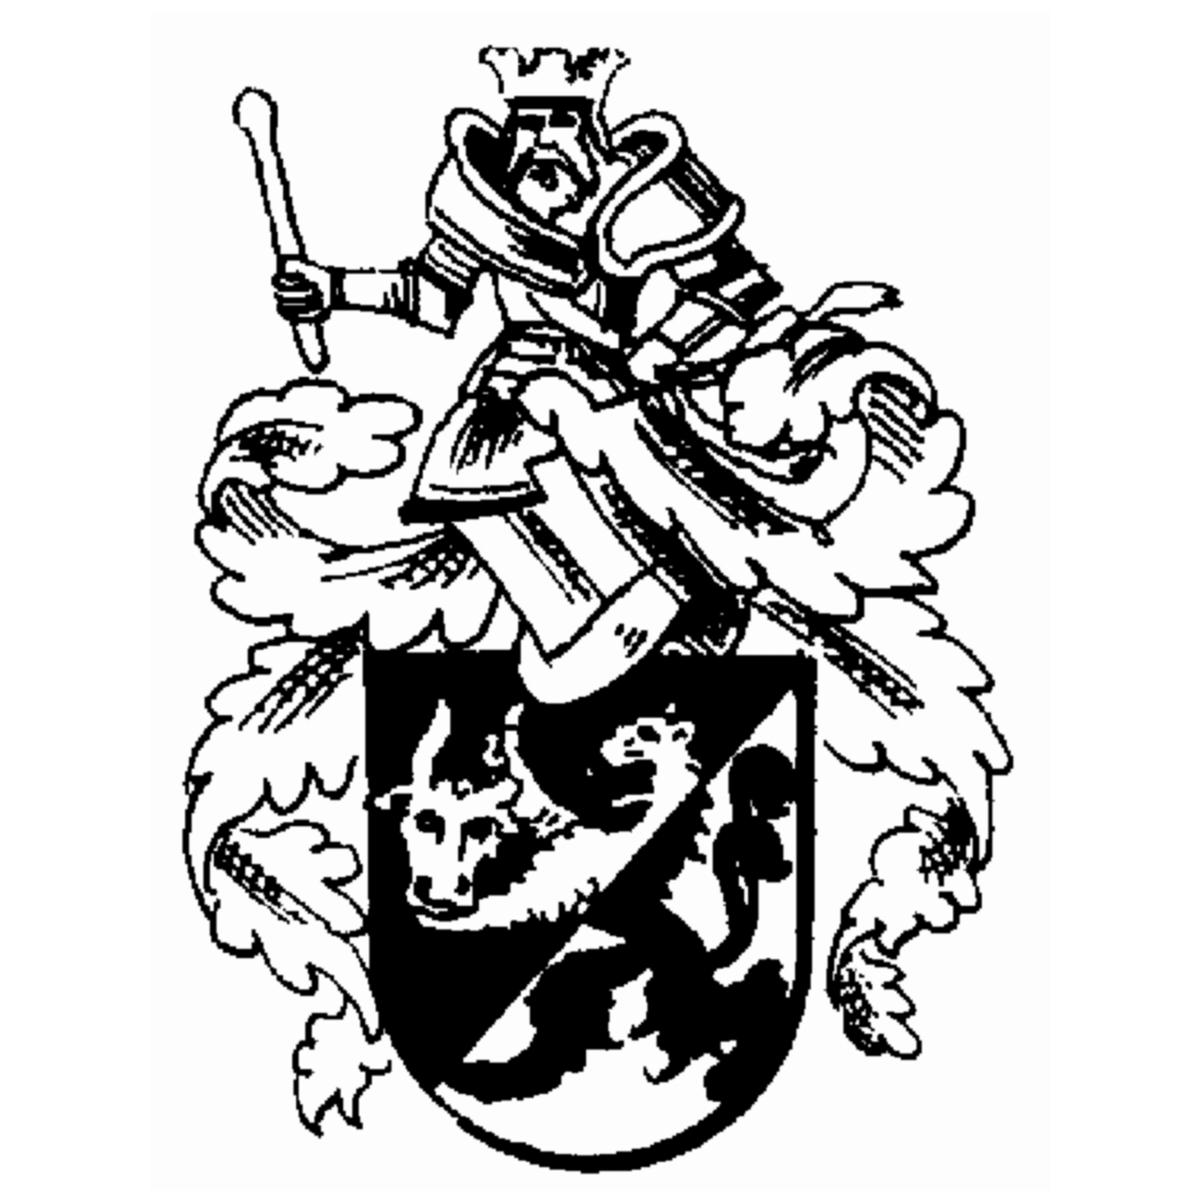 Coat of arms of family Bolle